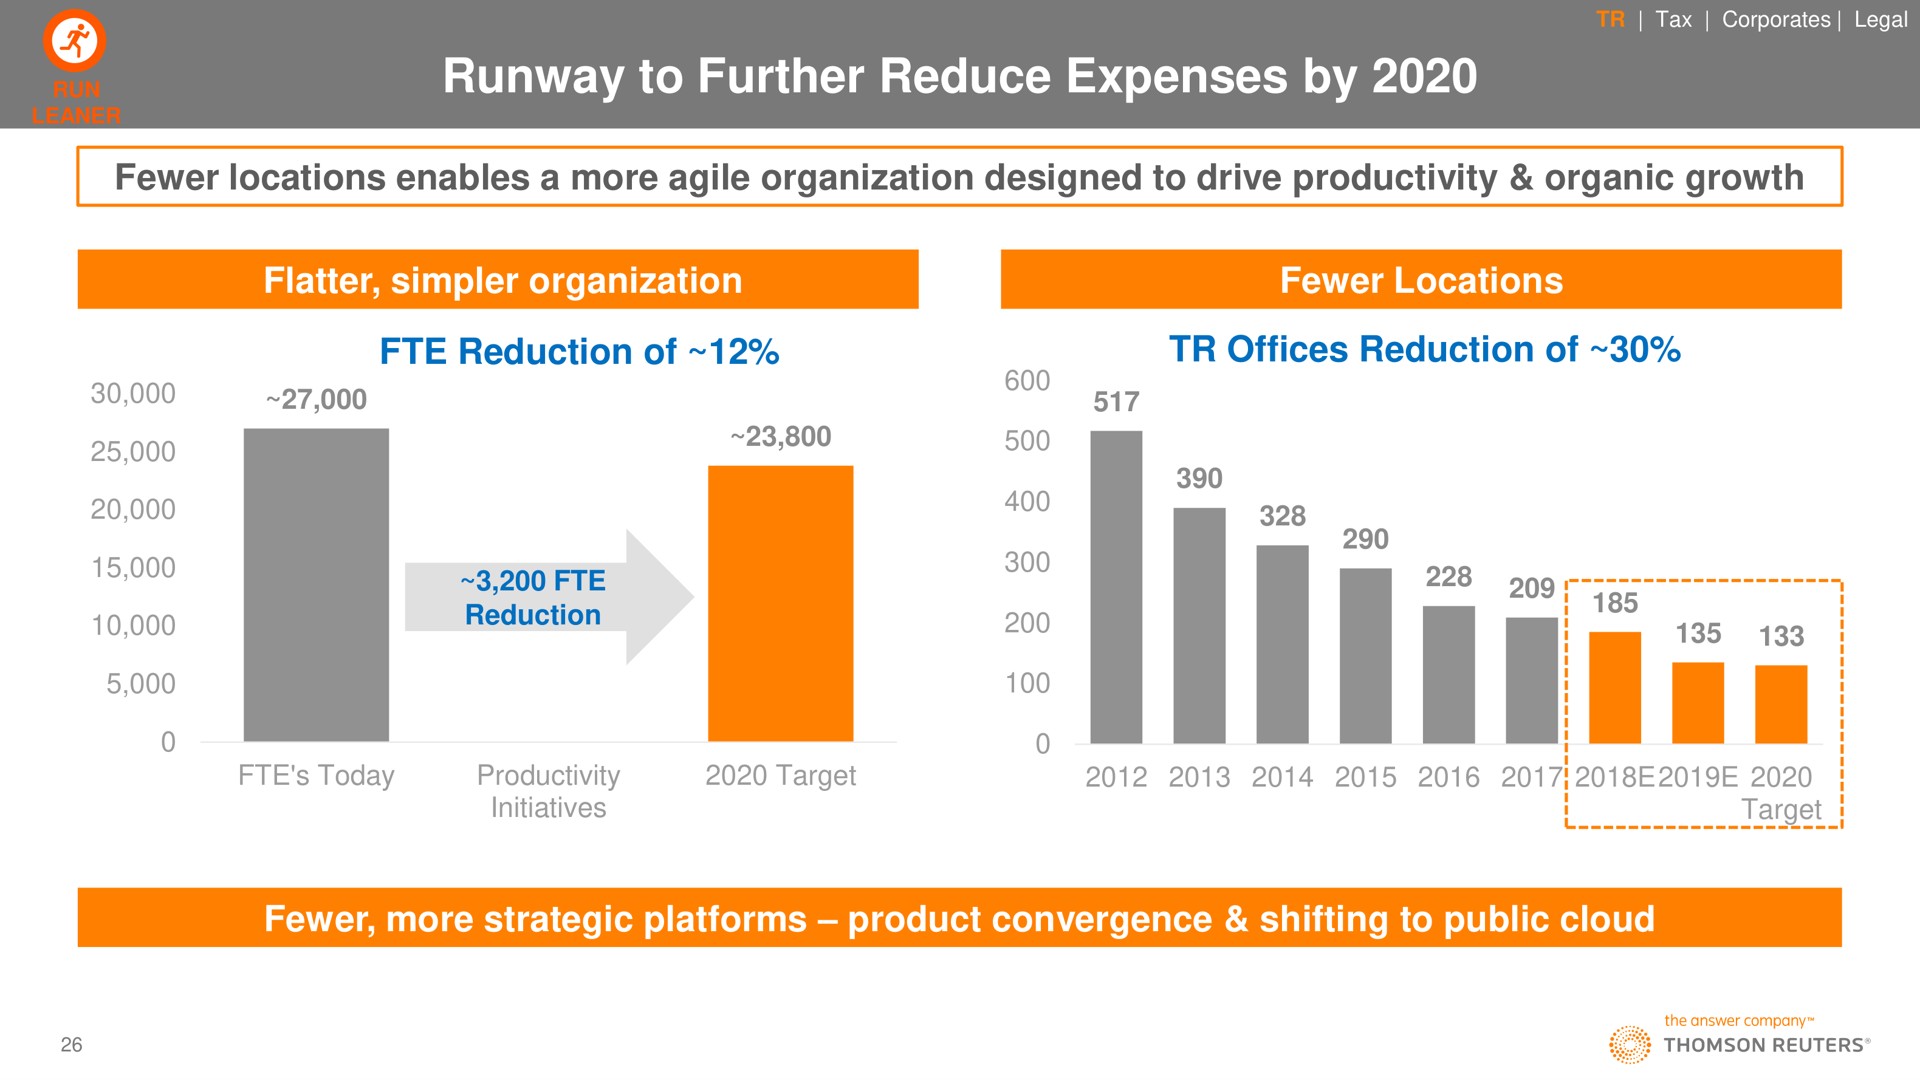 runway to further reduce expenses by peers | Thomson Reuters